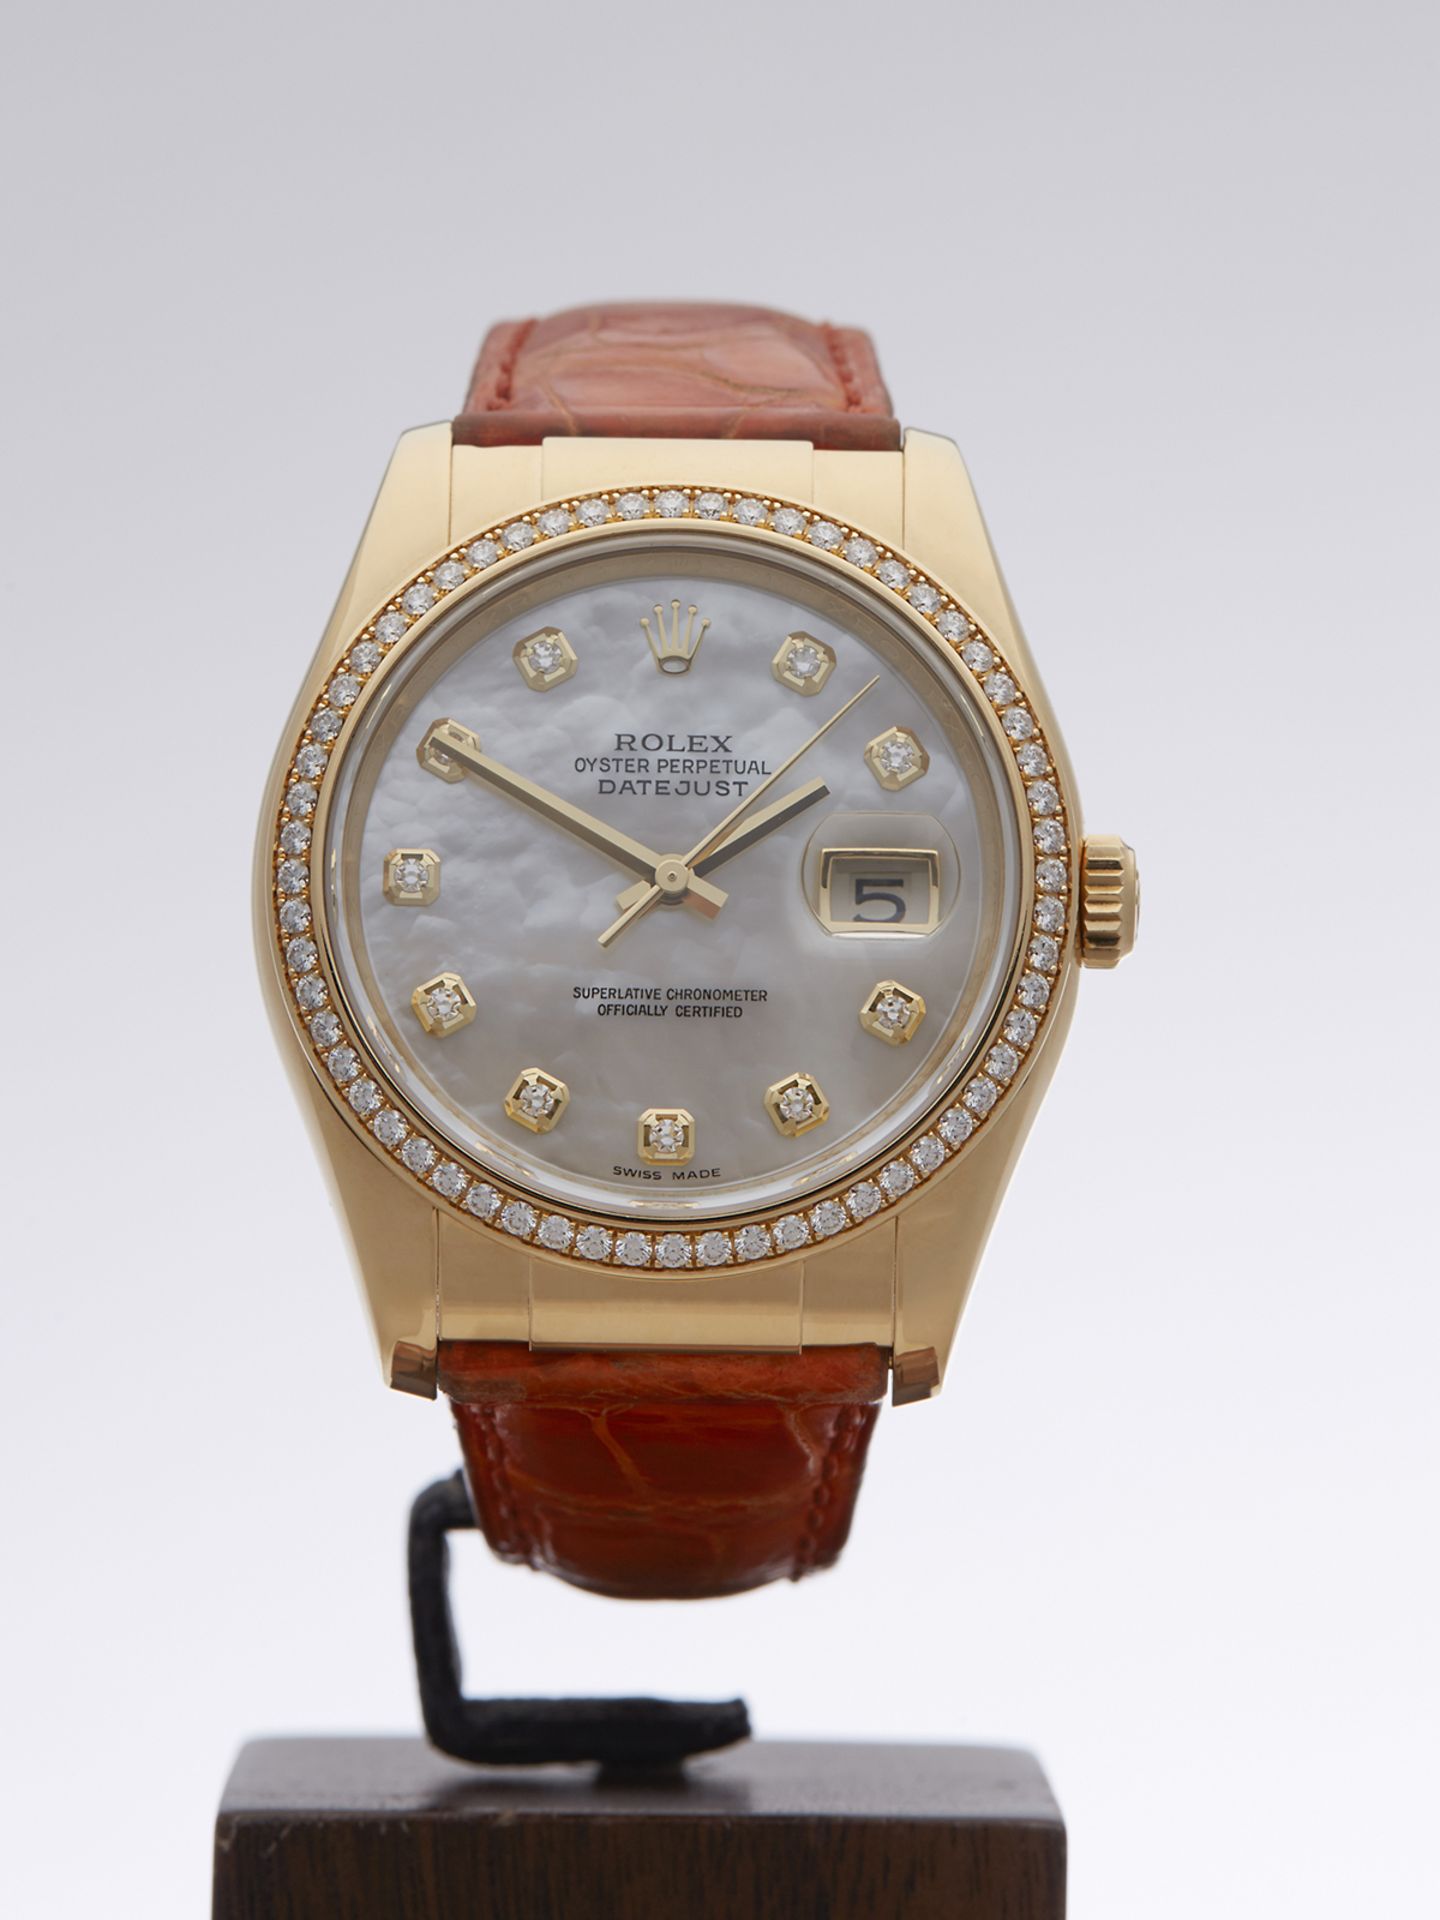 Rolex Datejust 36mm 18k Yellow Gold 116188 - Image 2 of 17